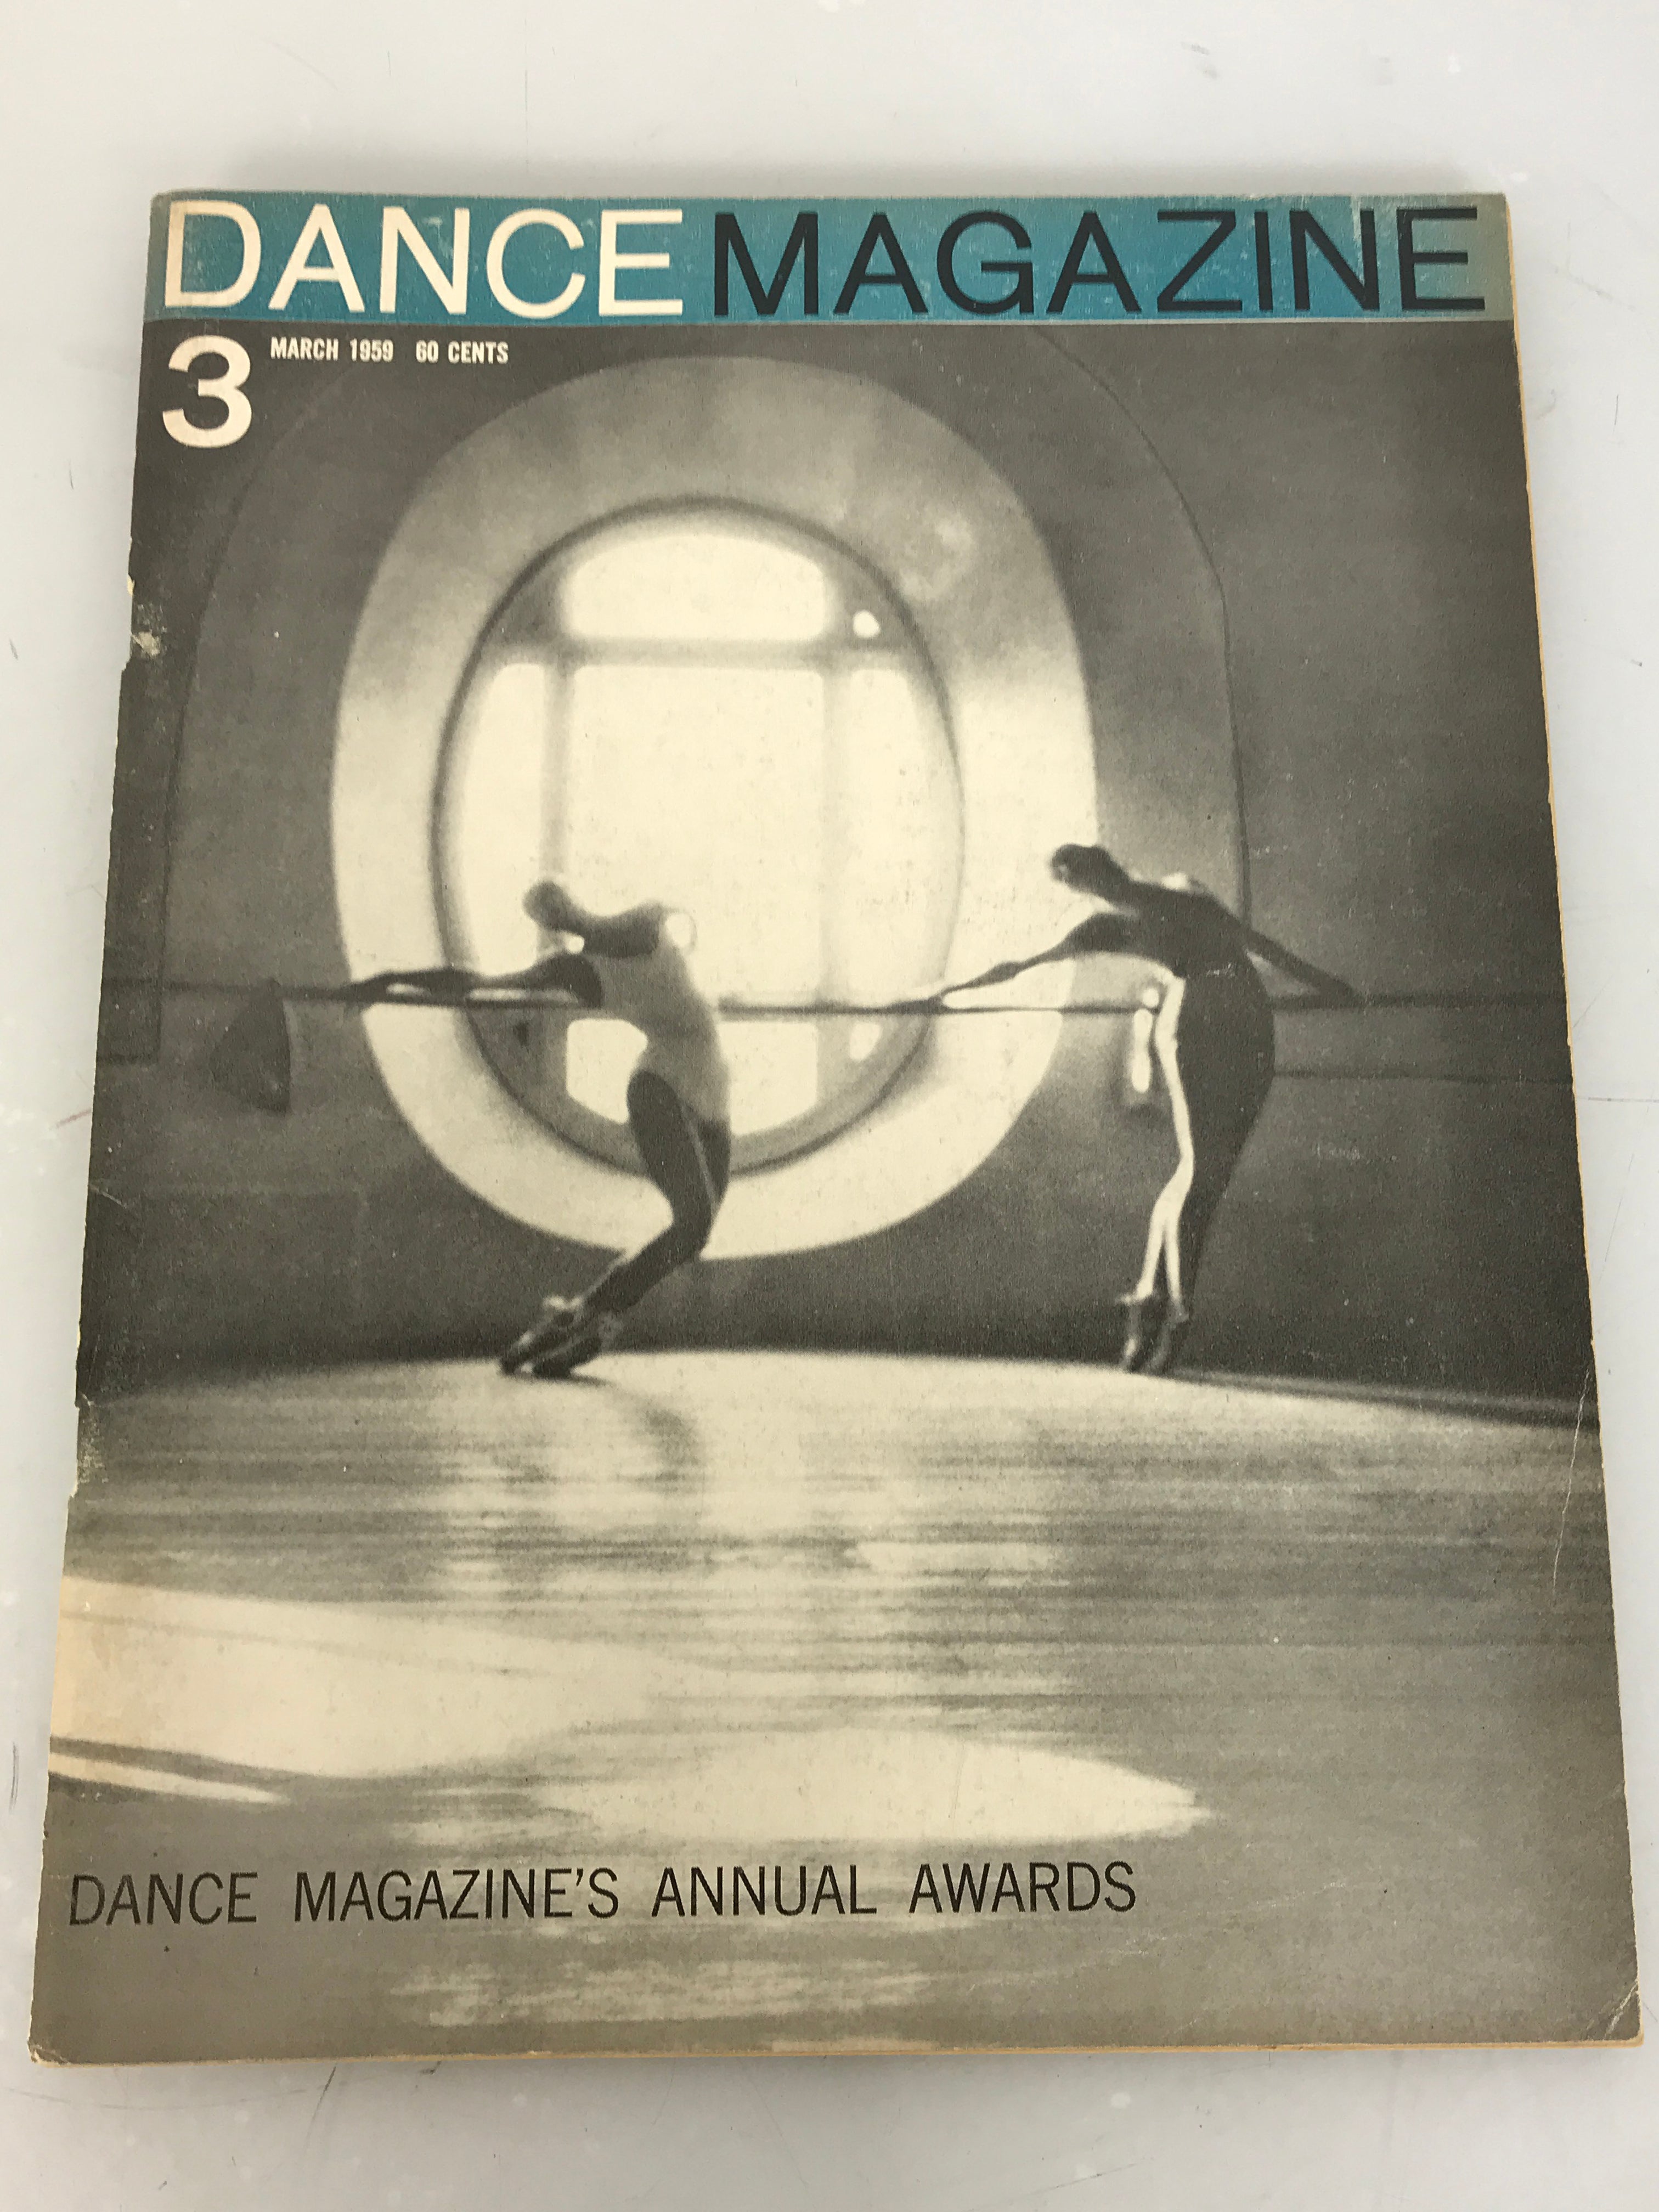 Lot of 11 Vintage Dance Magazines 1959 Andy Warhol, Fred Astaire, NYC Ballet Retrospective